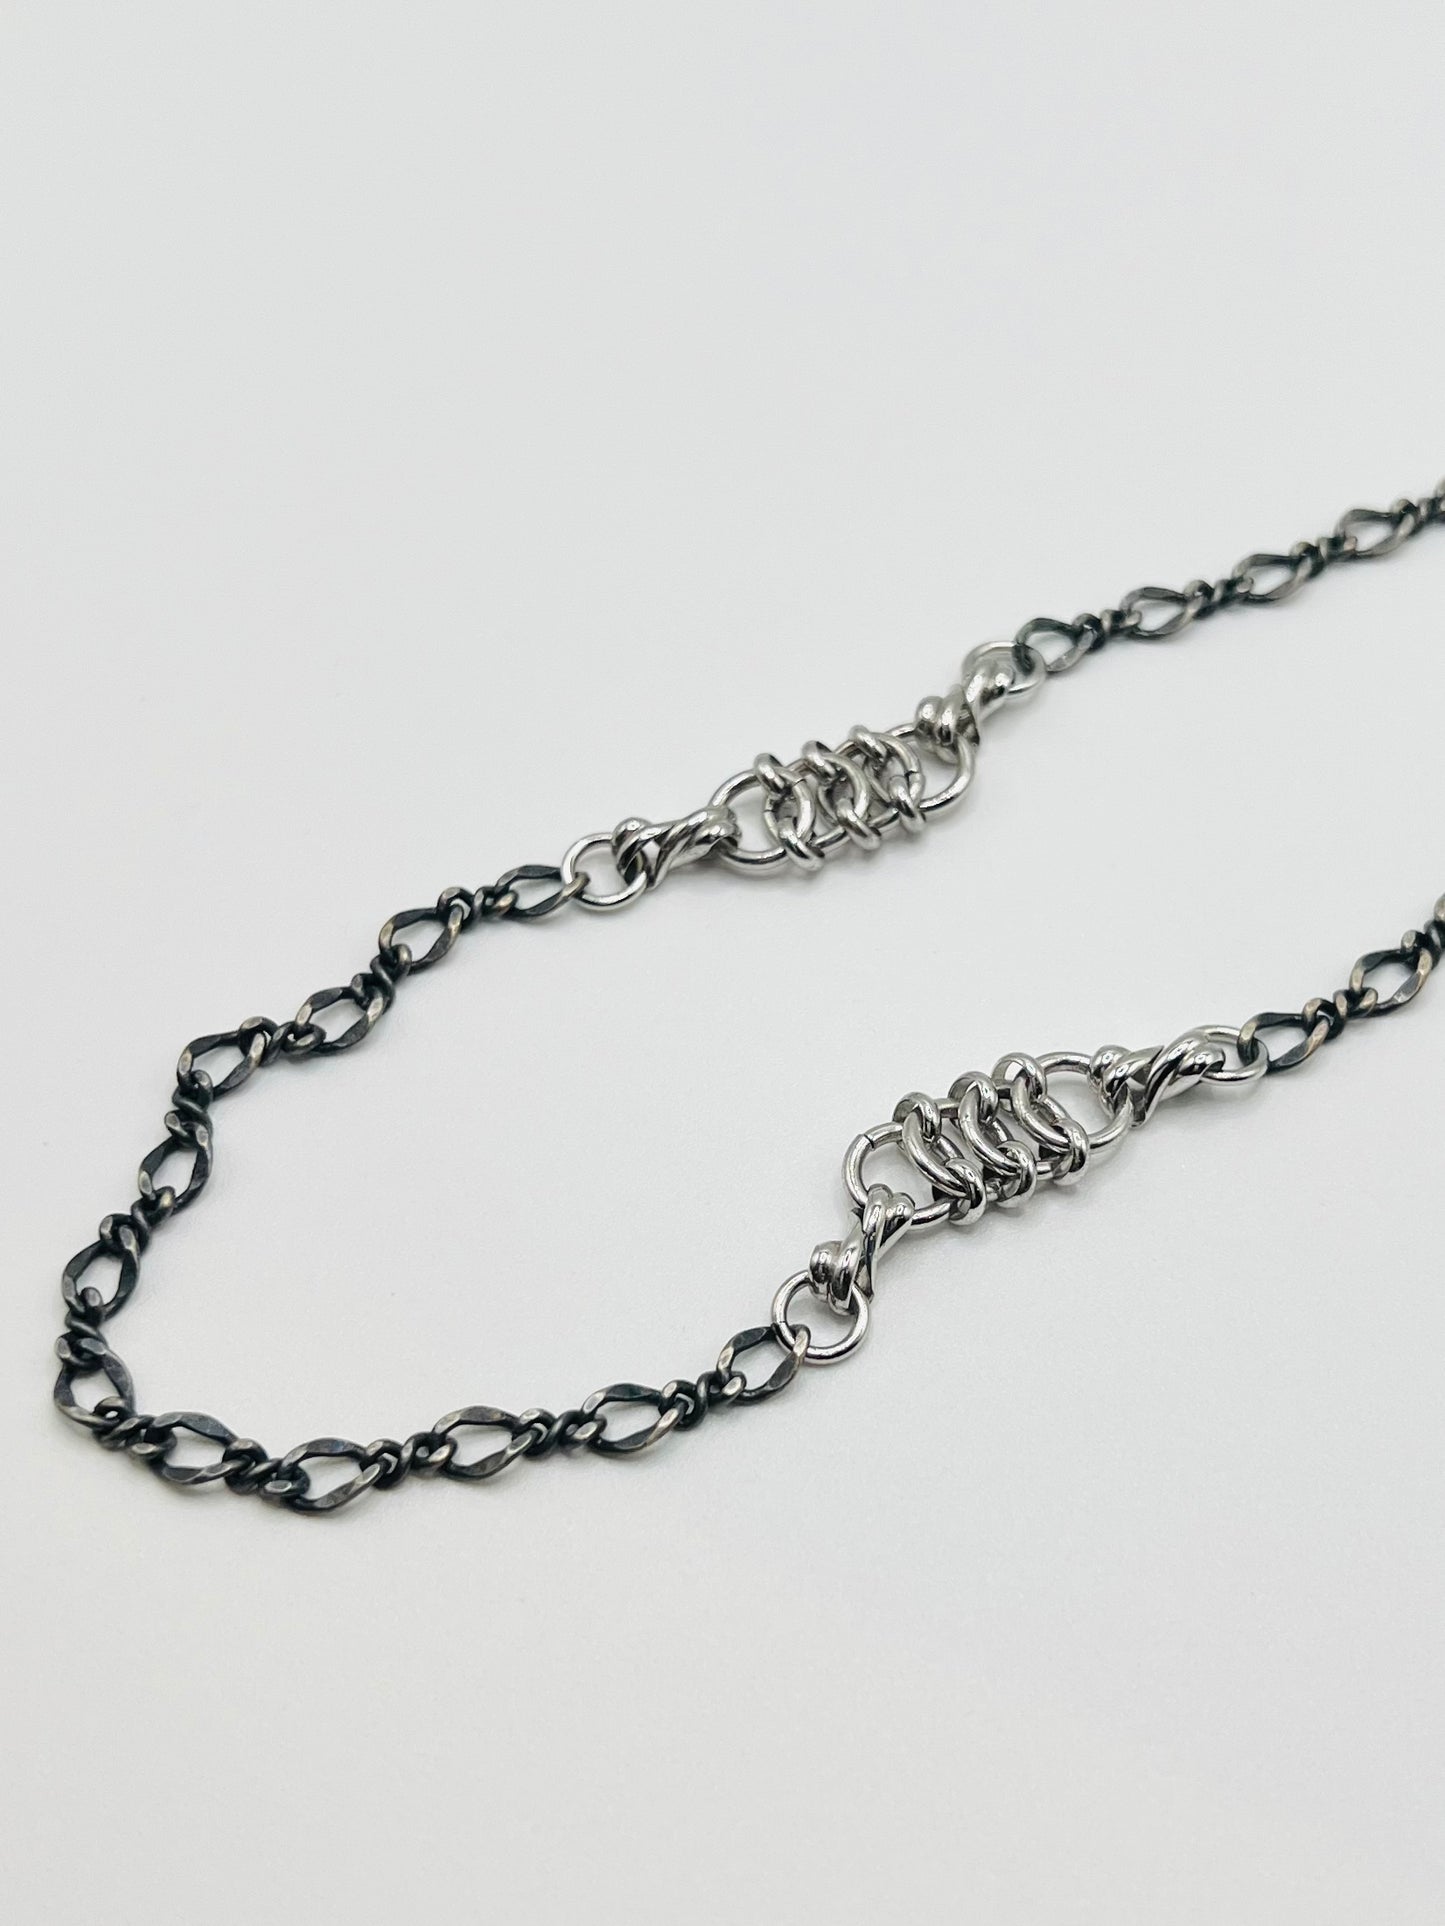 Chain charm necklace